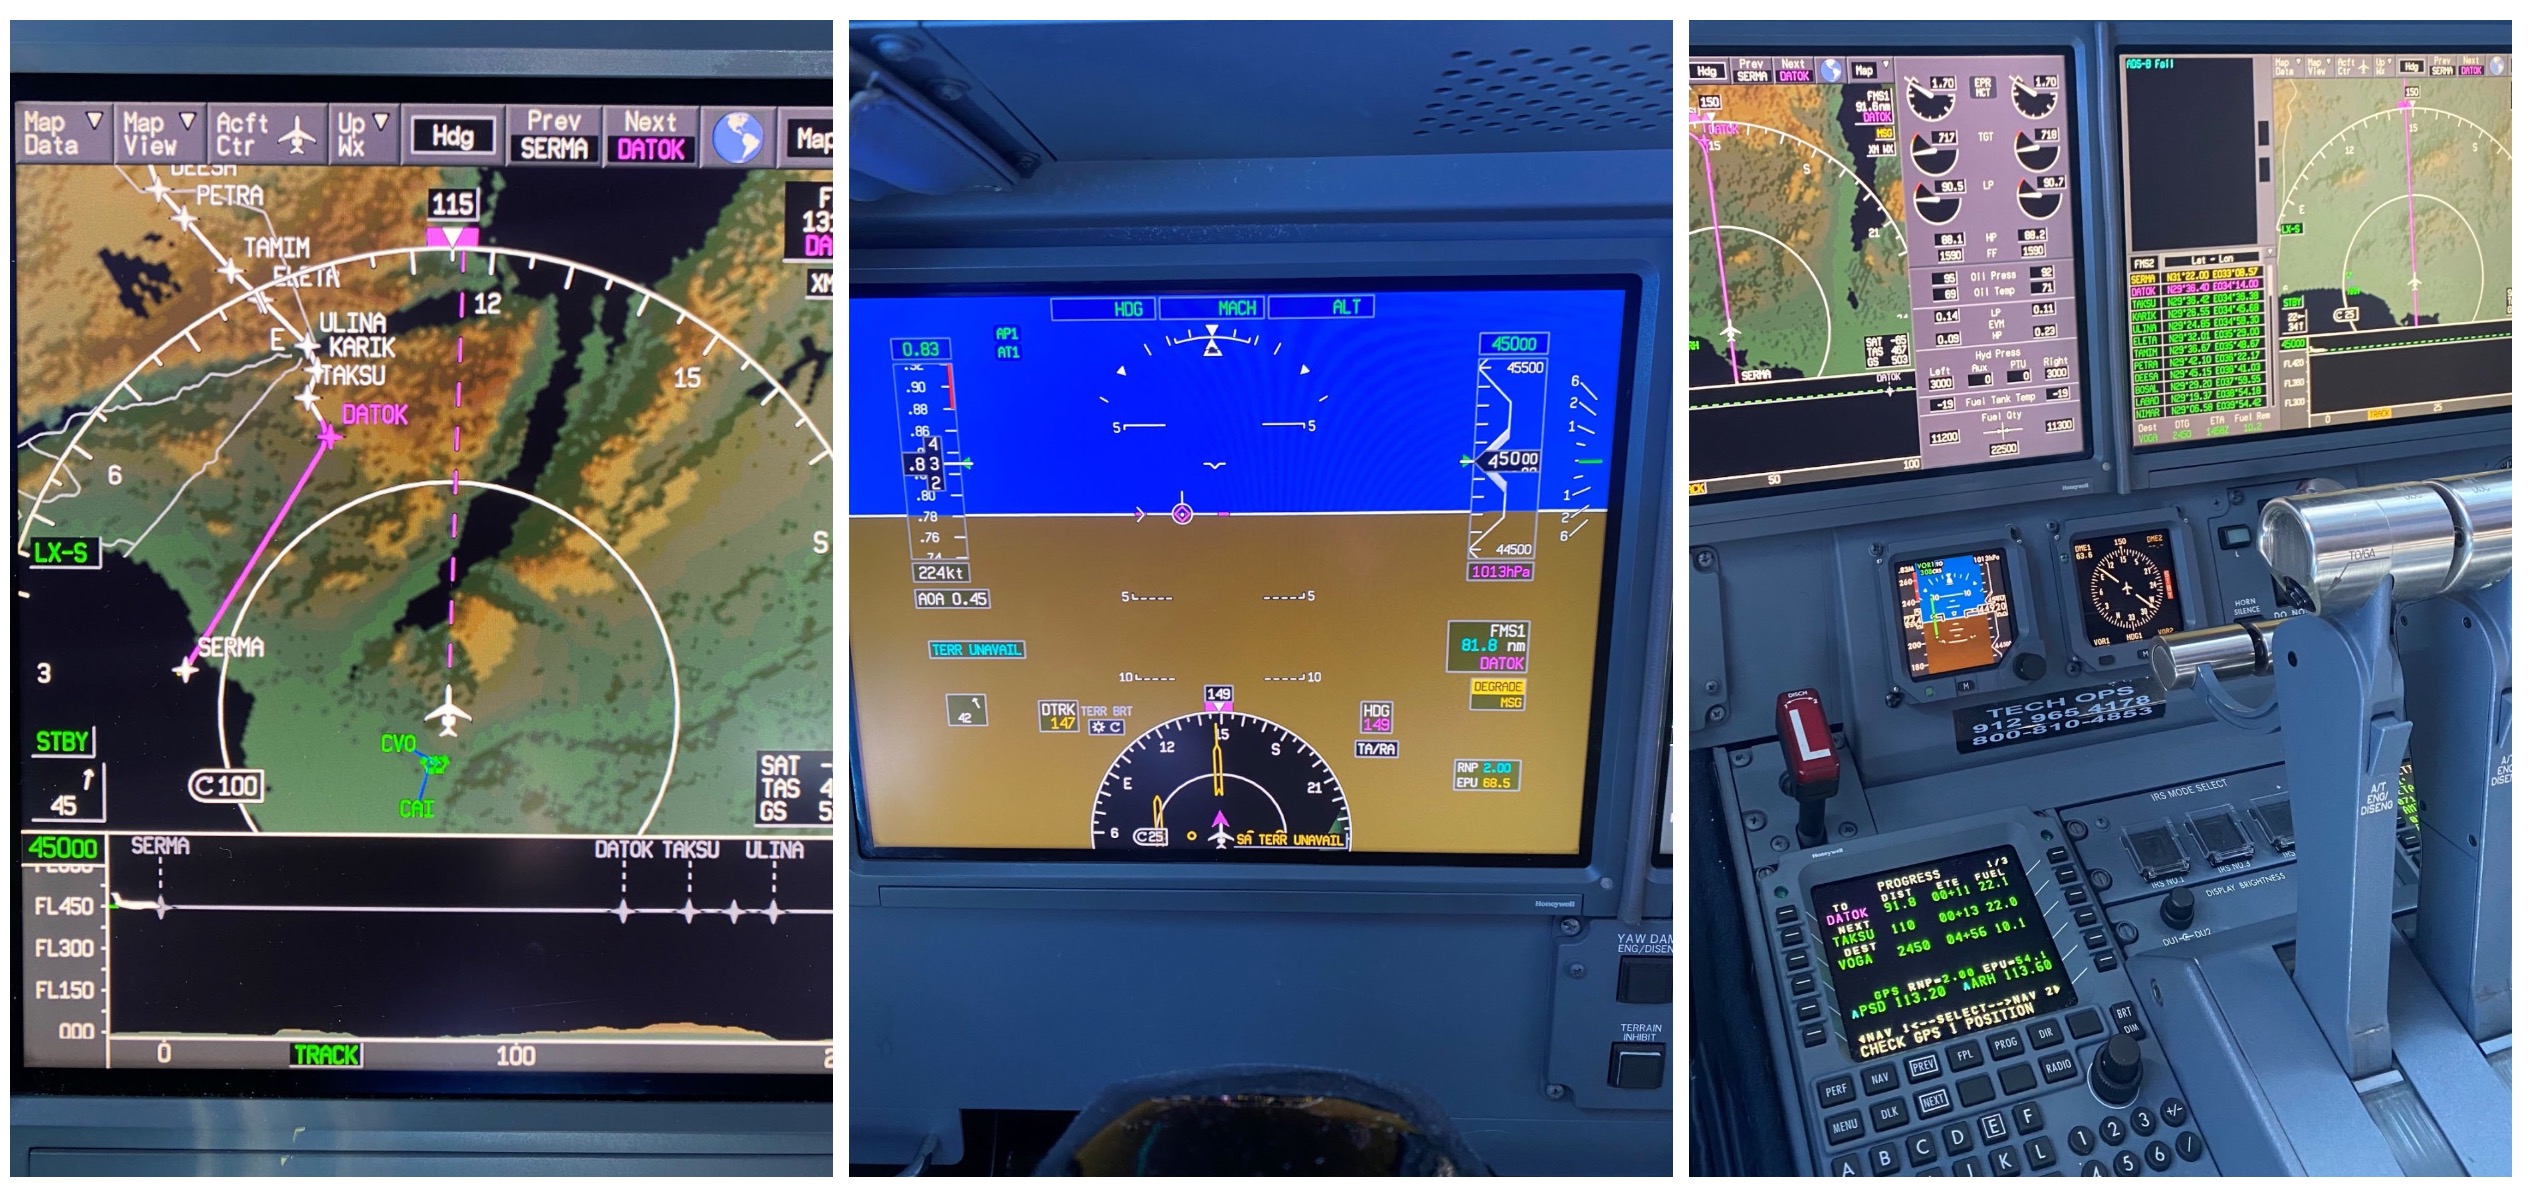 GPS Spoofing: Pilot QRH – Hotspots and What To Expect